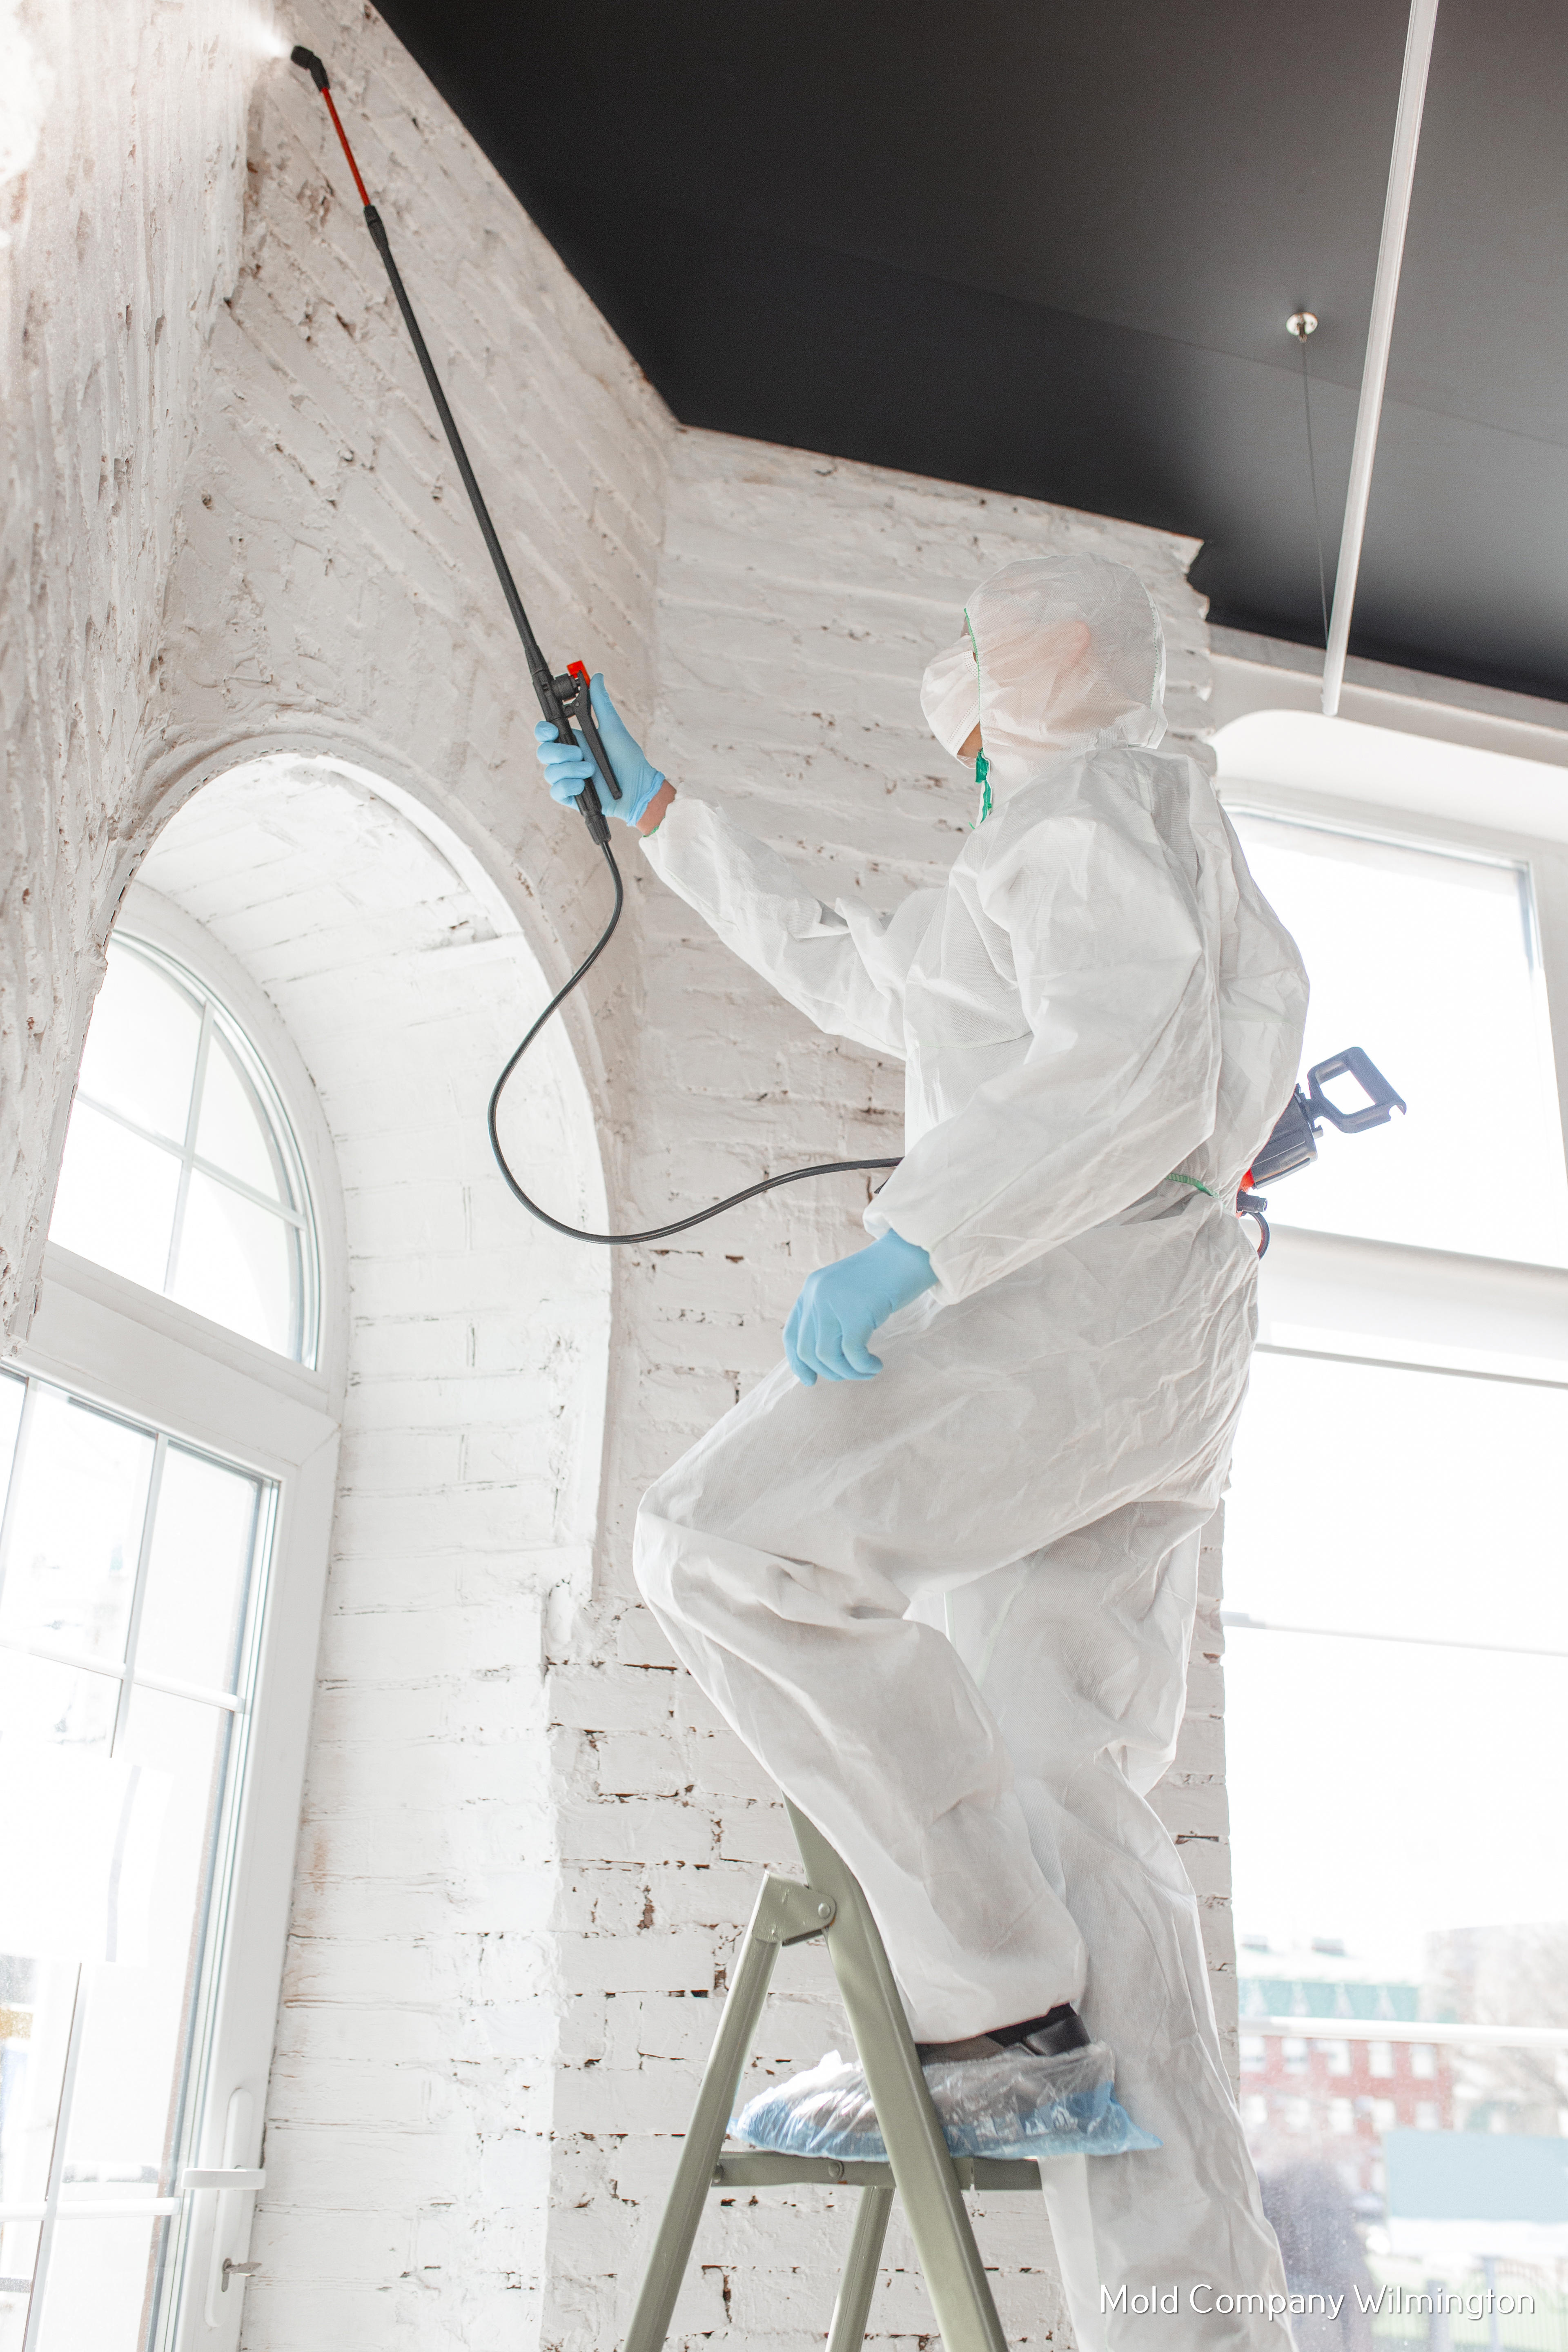 Reasons to Work with a Mold Company in Wilmington, NC